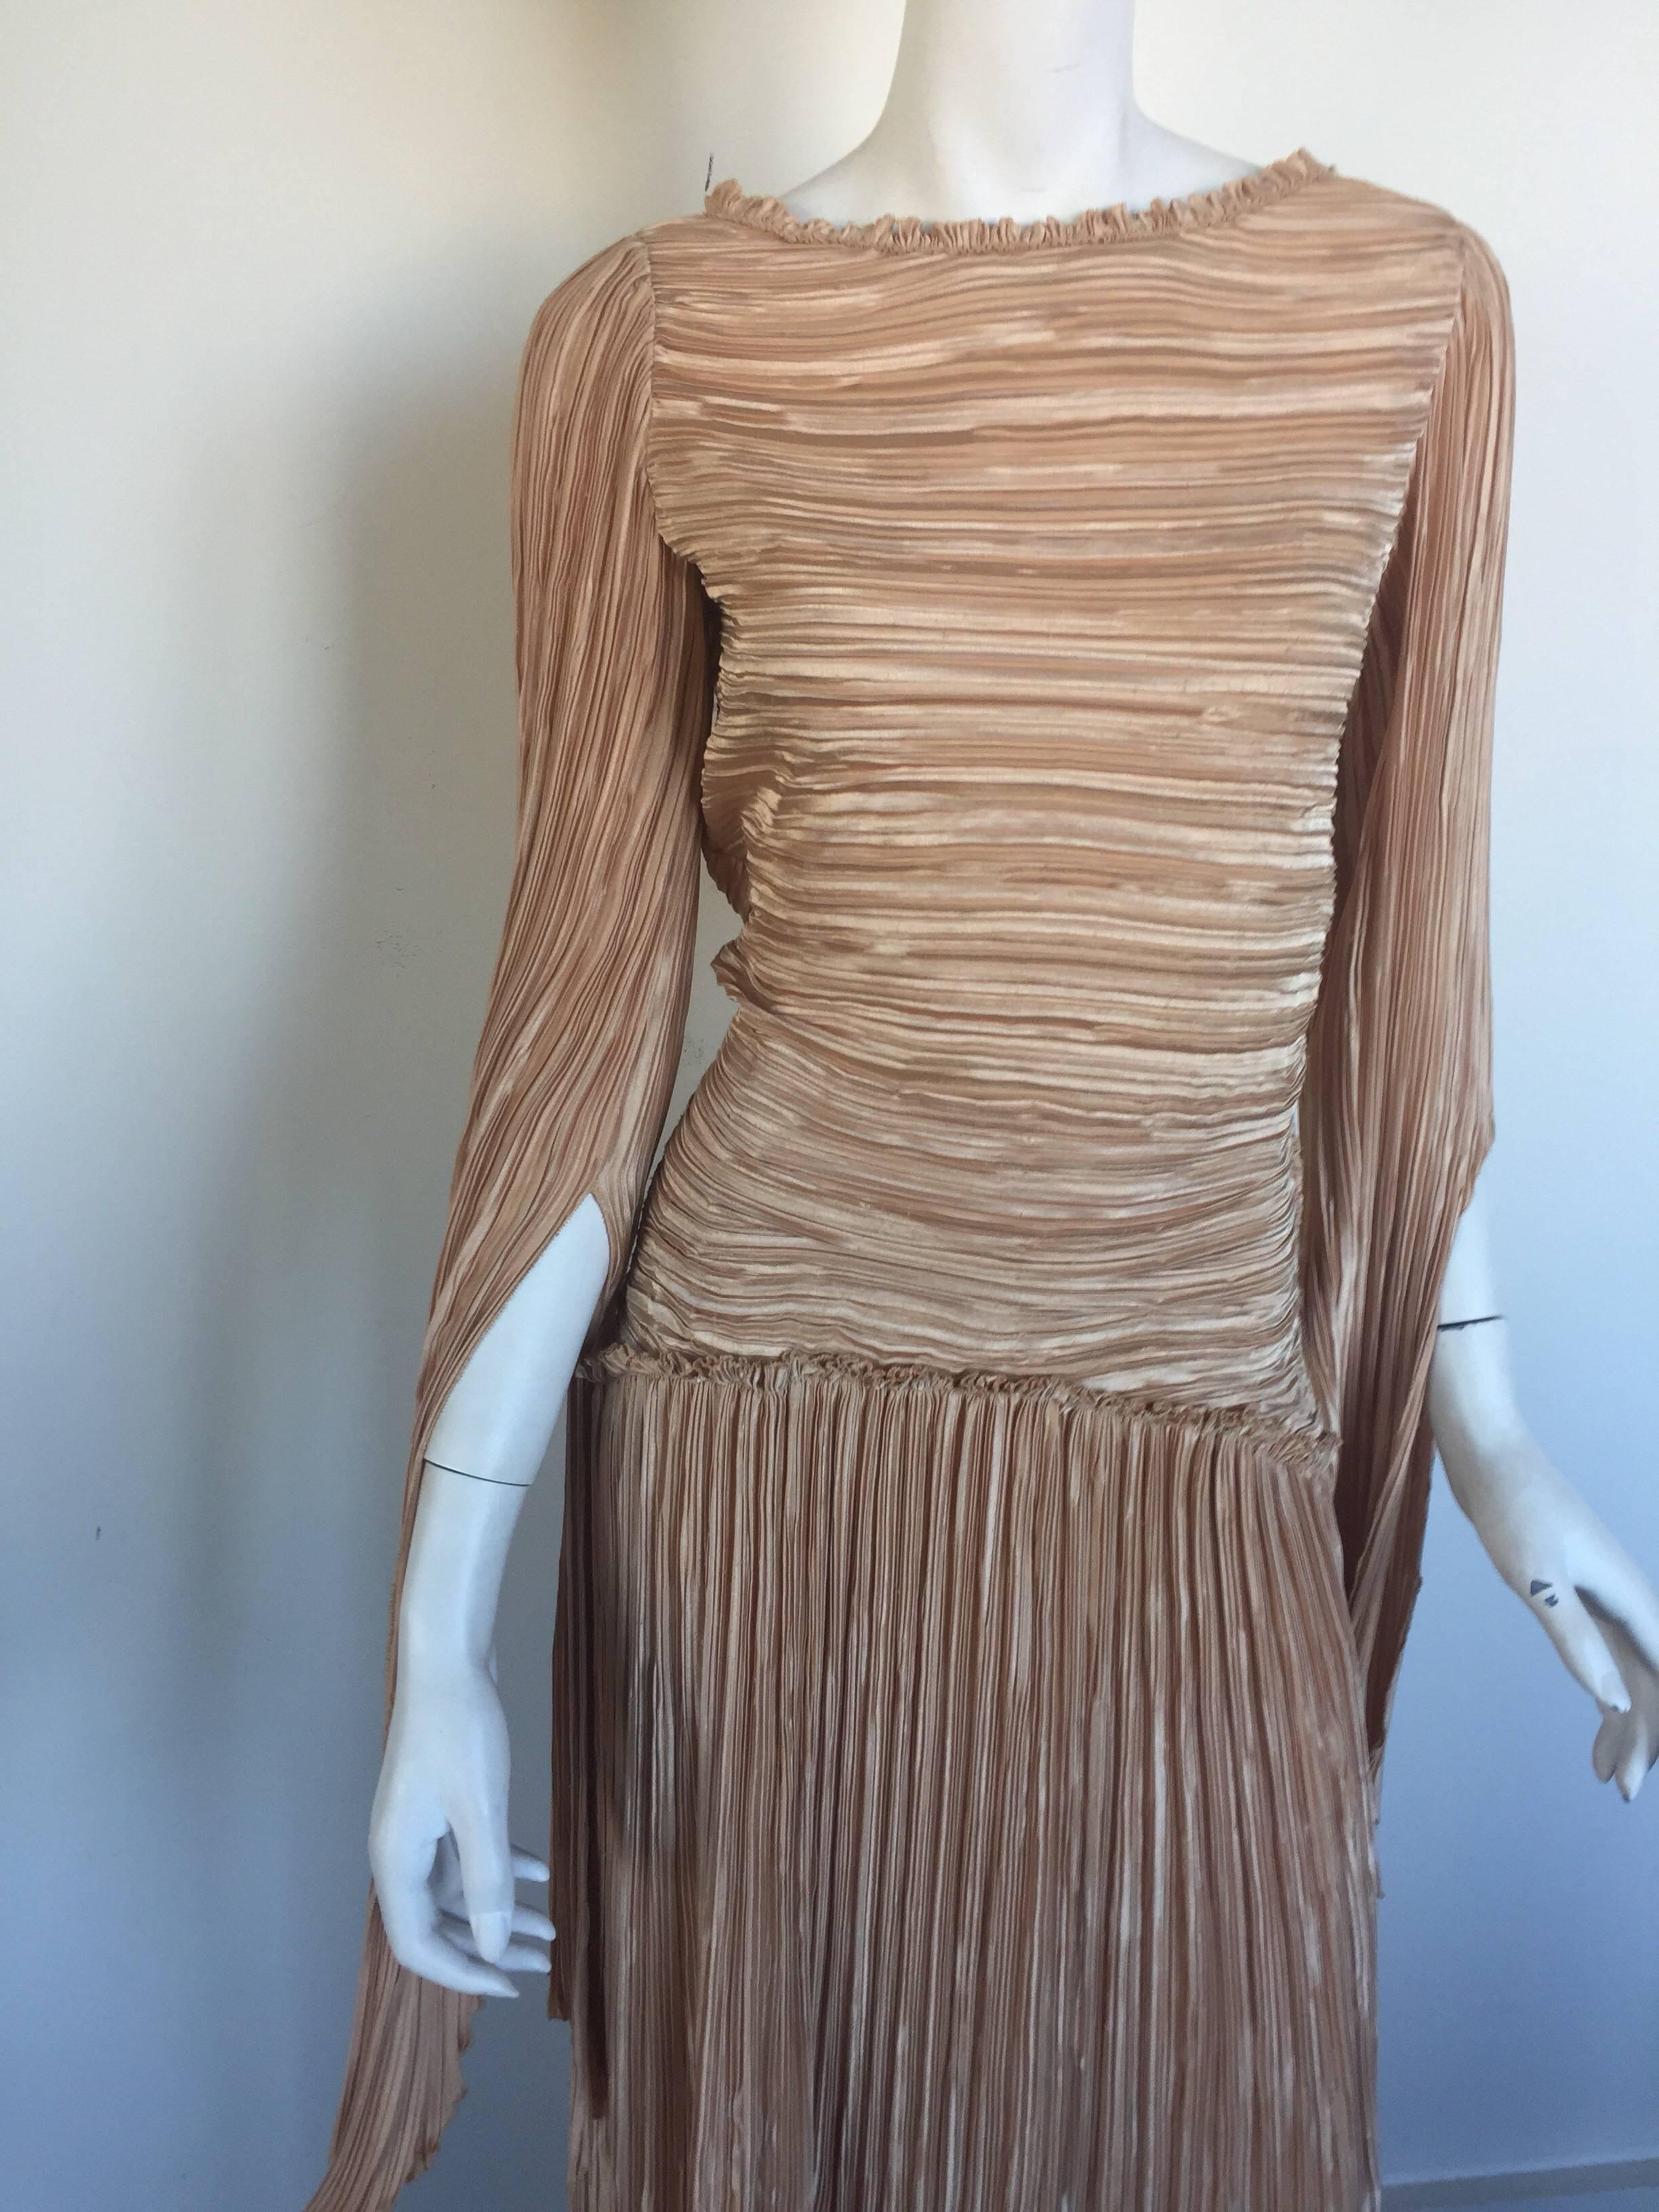 Thud nude Mary McFadden has a drop waist and long slit sleeves and a boat neck.  It is in fairly good condition with a few snags to fabric.  it has a double side zipper and is missing a size label but fits a small/medium.